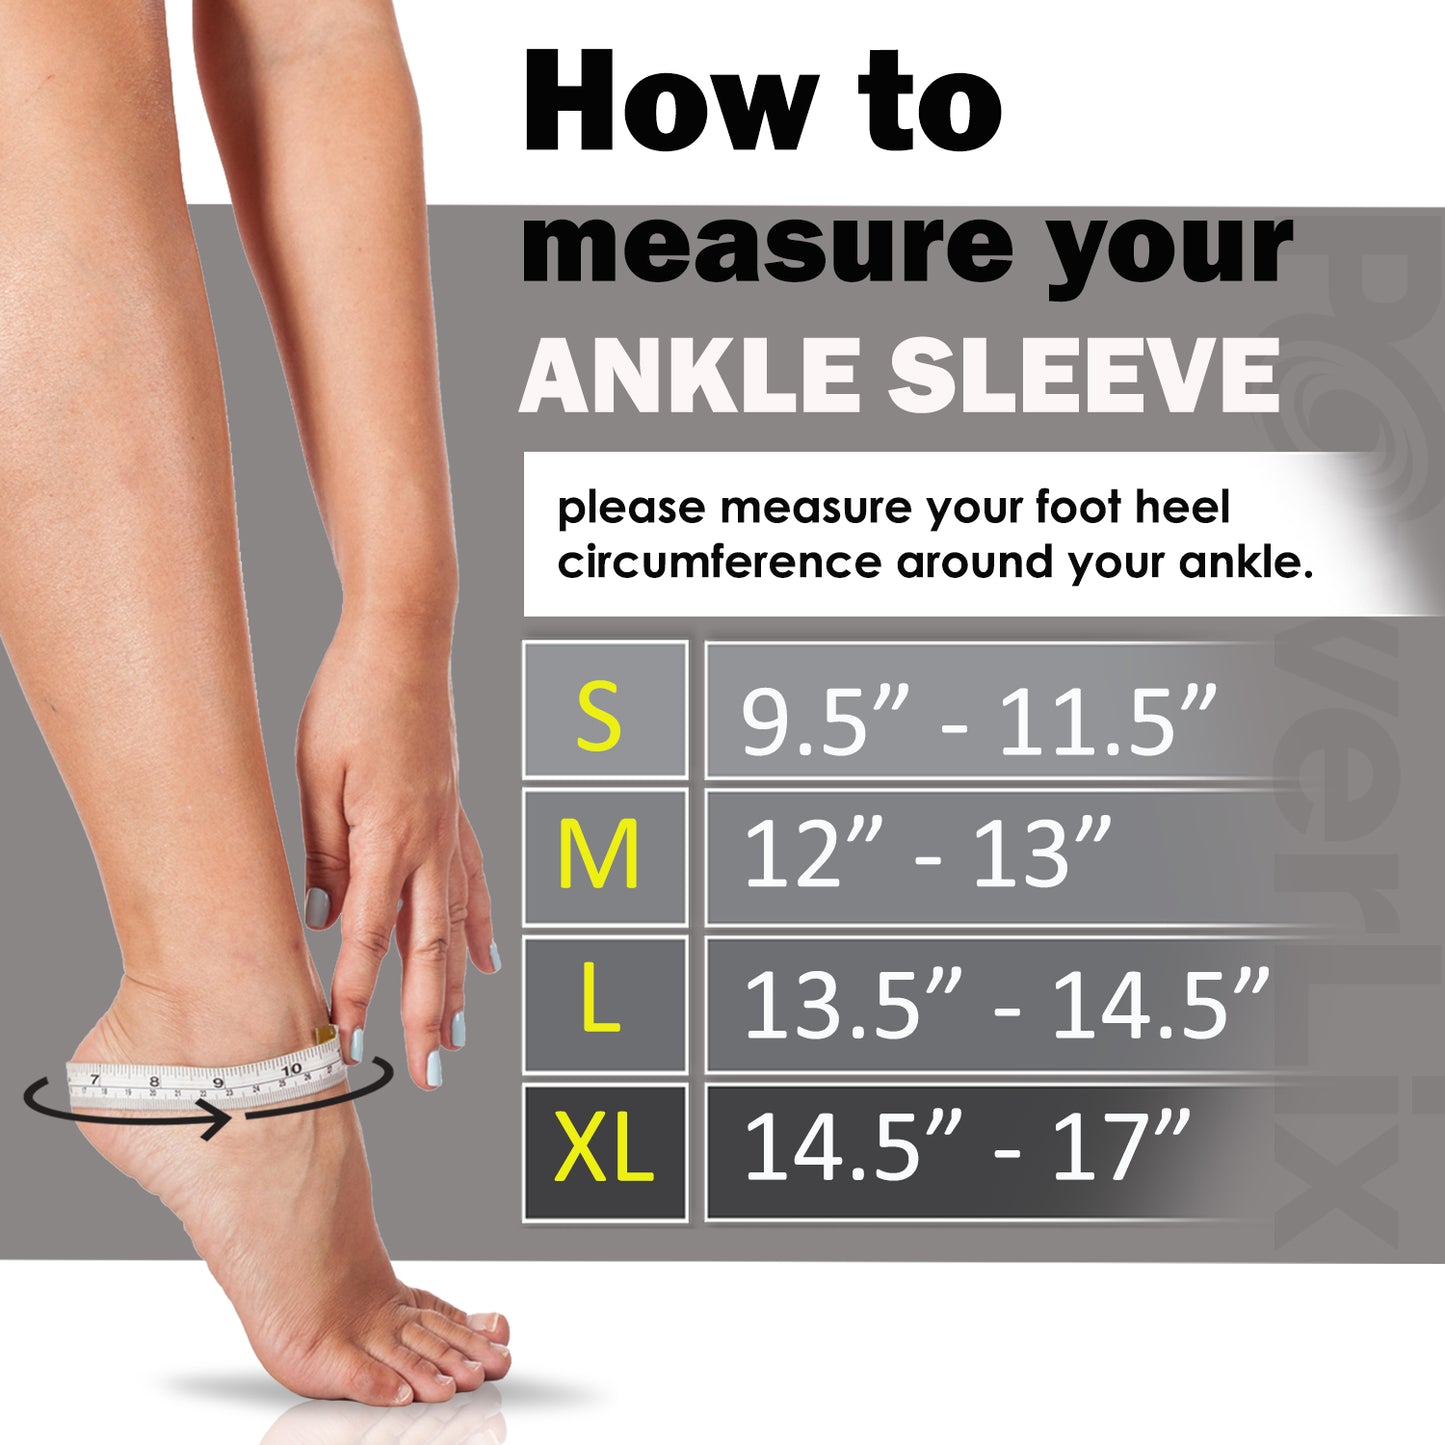 a person's feet with a measuring tape with text: 'How to measure your ANKLE SLEEVE please measure your foot heel circumference around your ankle. S 9.5" - 11.5" M 12" - 13" D L 13.5" - 14.5" 8 9 XL 14.5" - 17"'